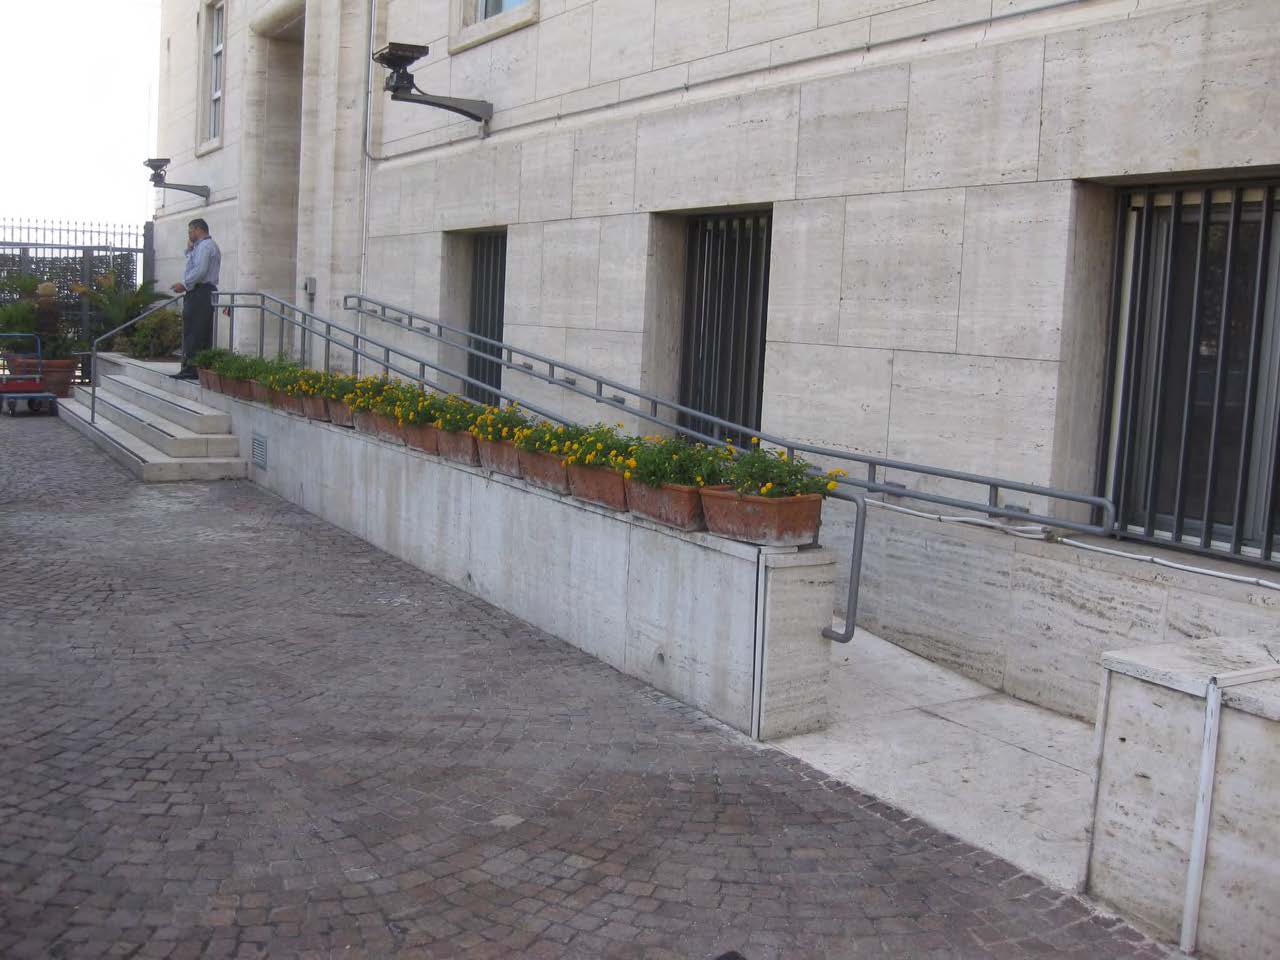 Accessible Route – Main Entrance Ramp